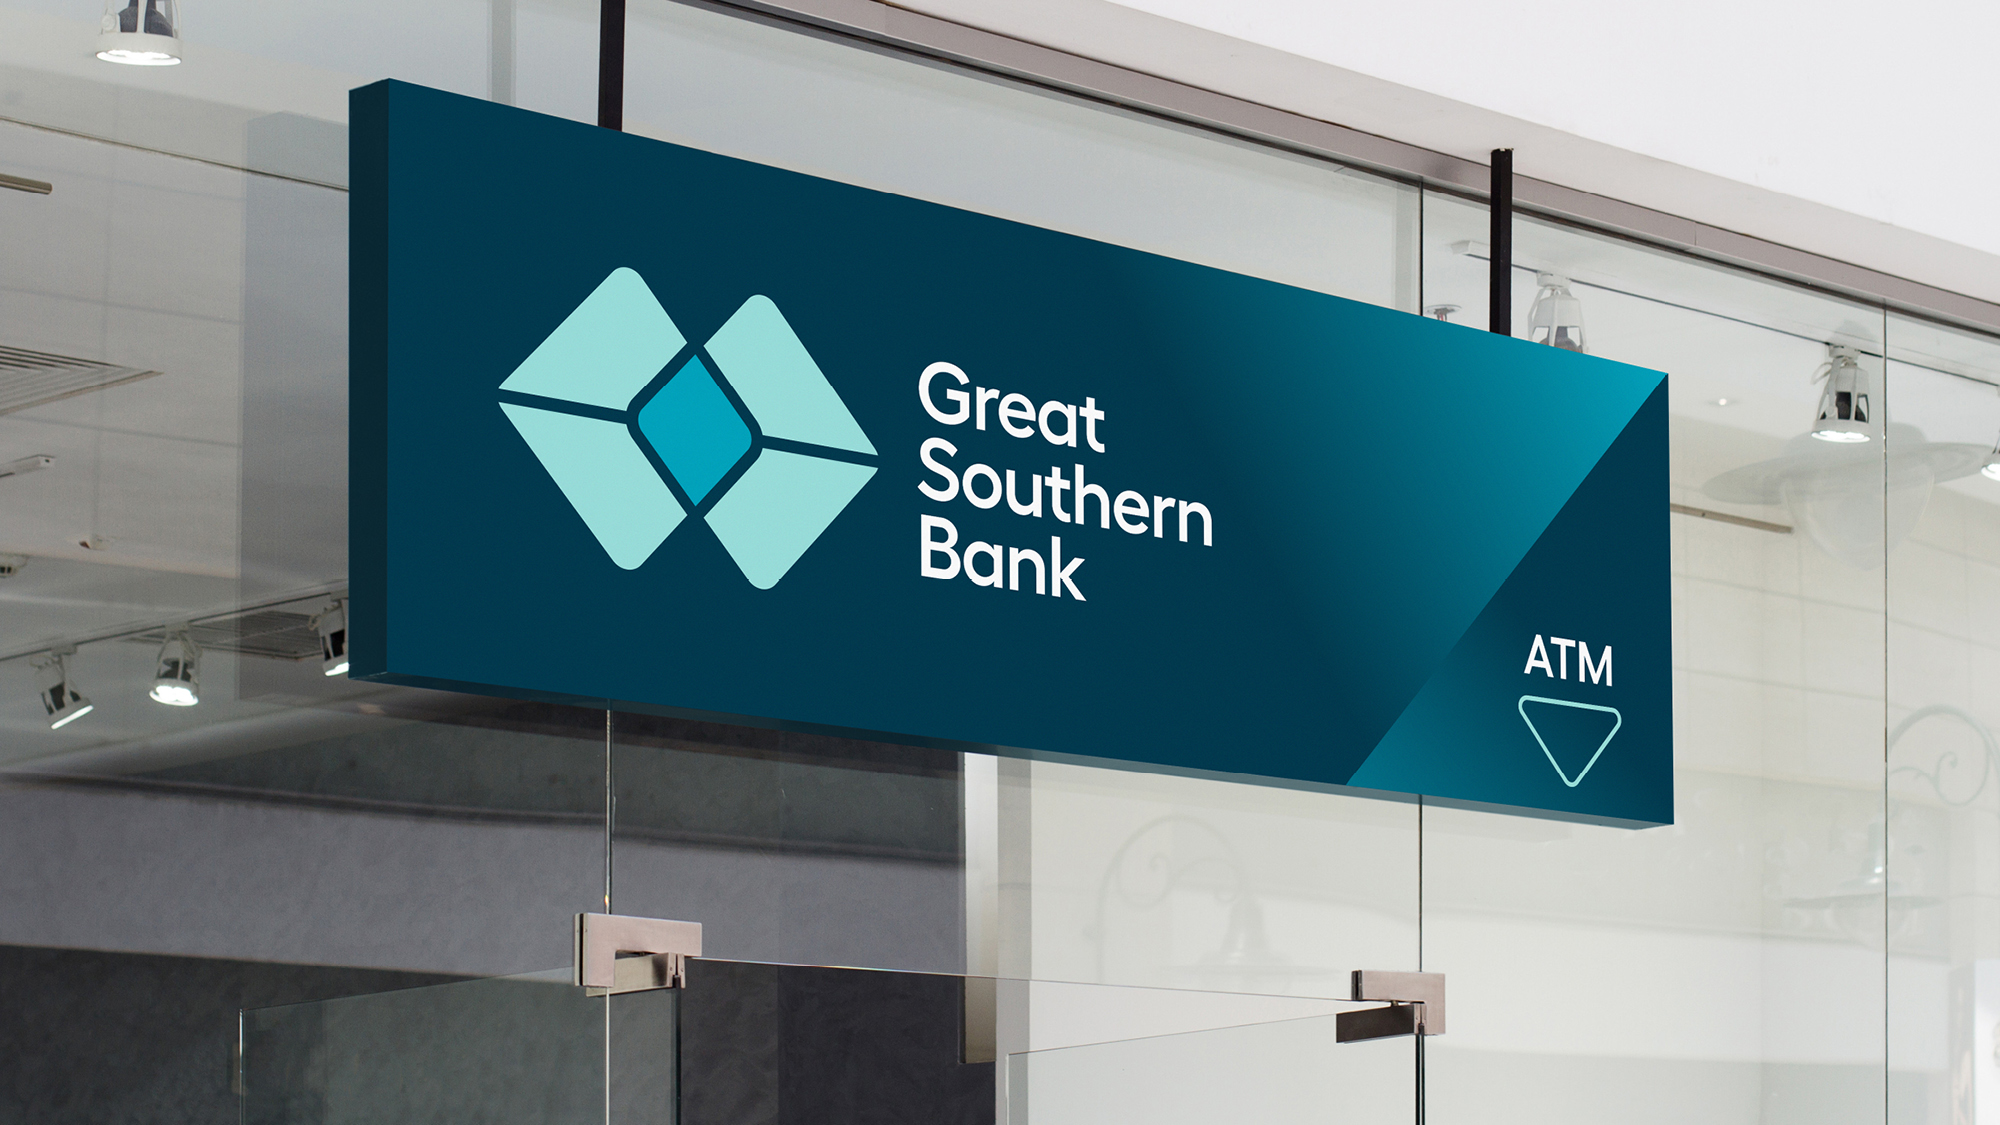 Entity-3-Three-Brand-Design-Agency-Sydney-Great-Southern-Bank-7-environments-experience-signage-entry-sign